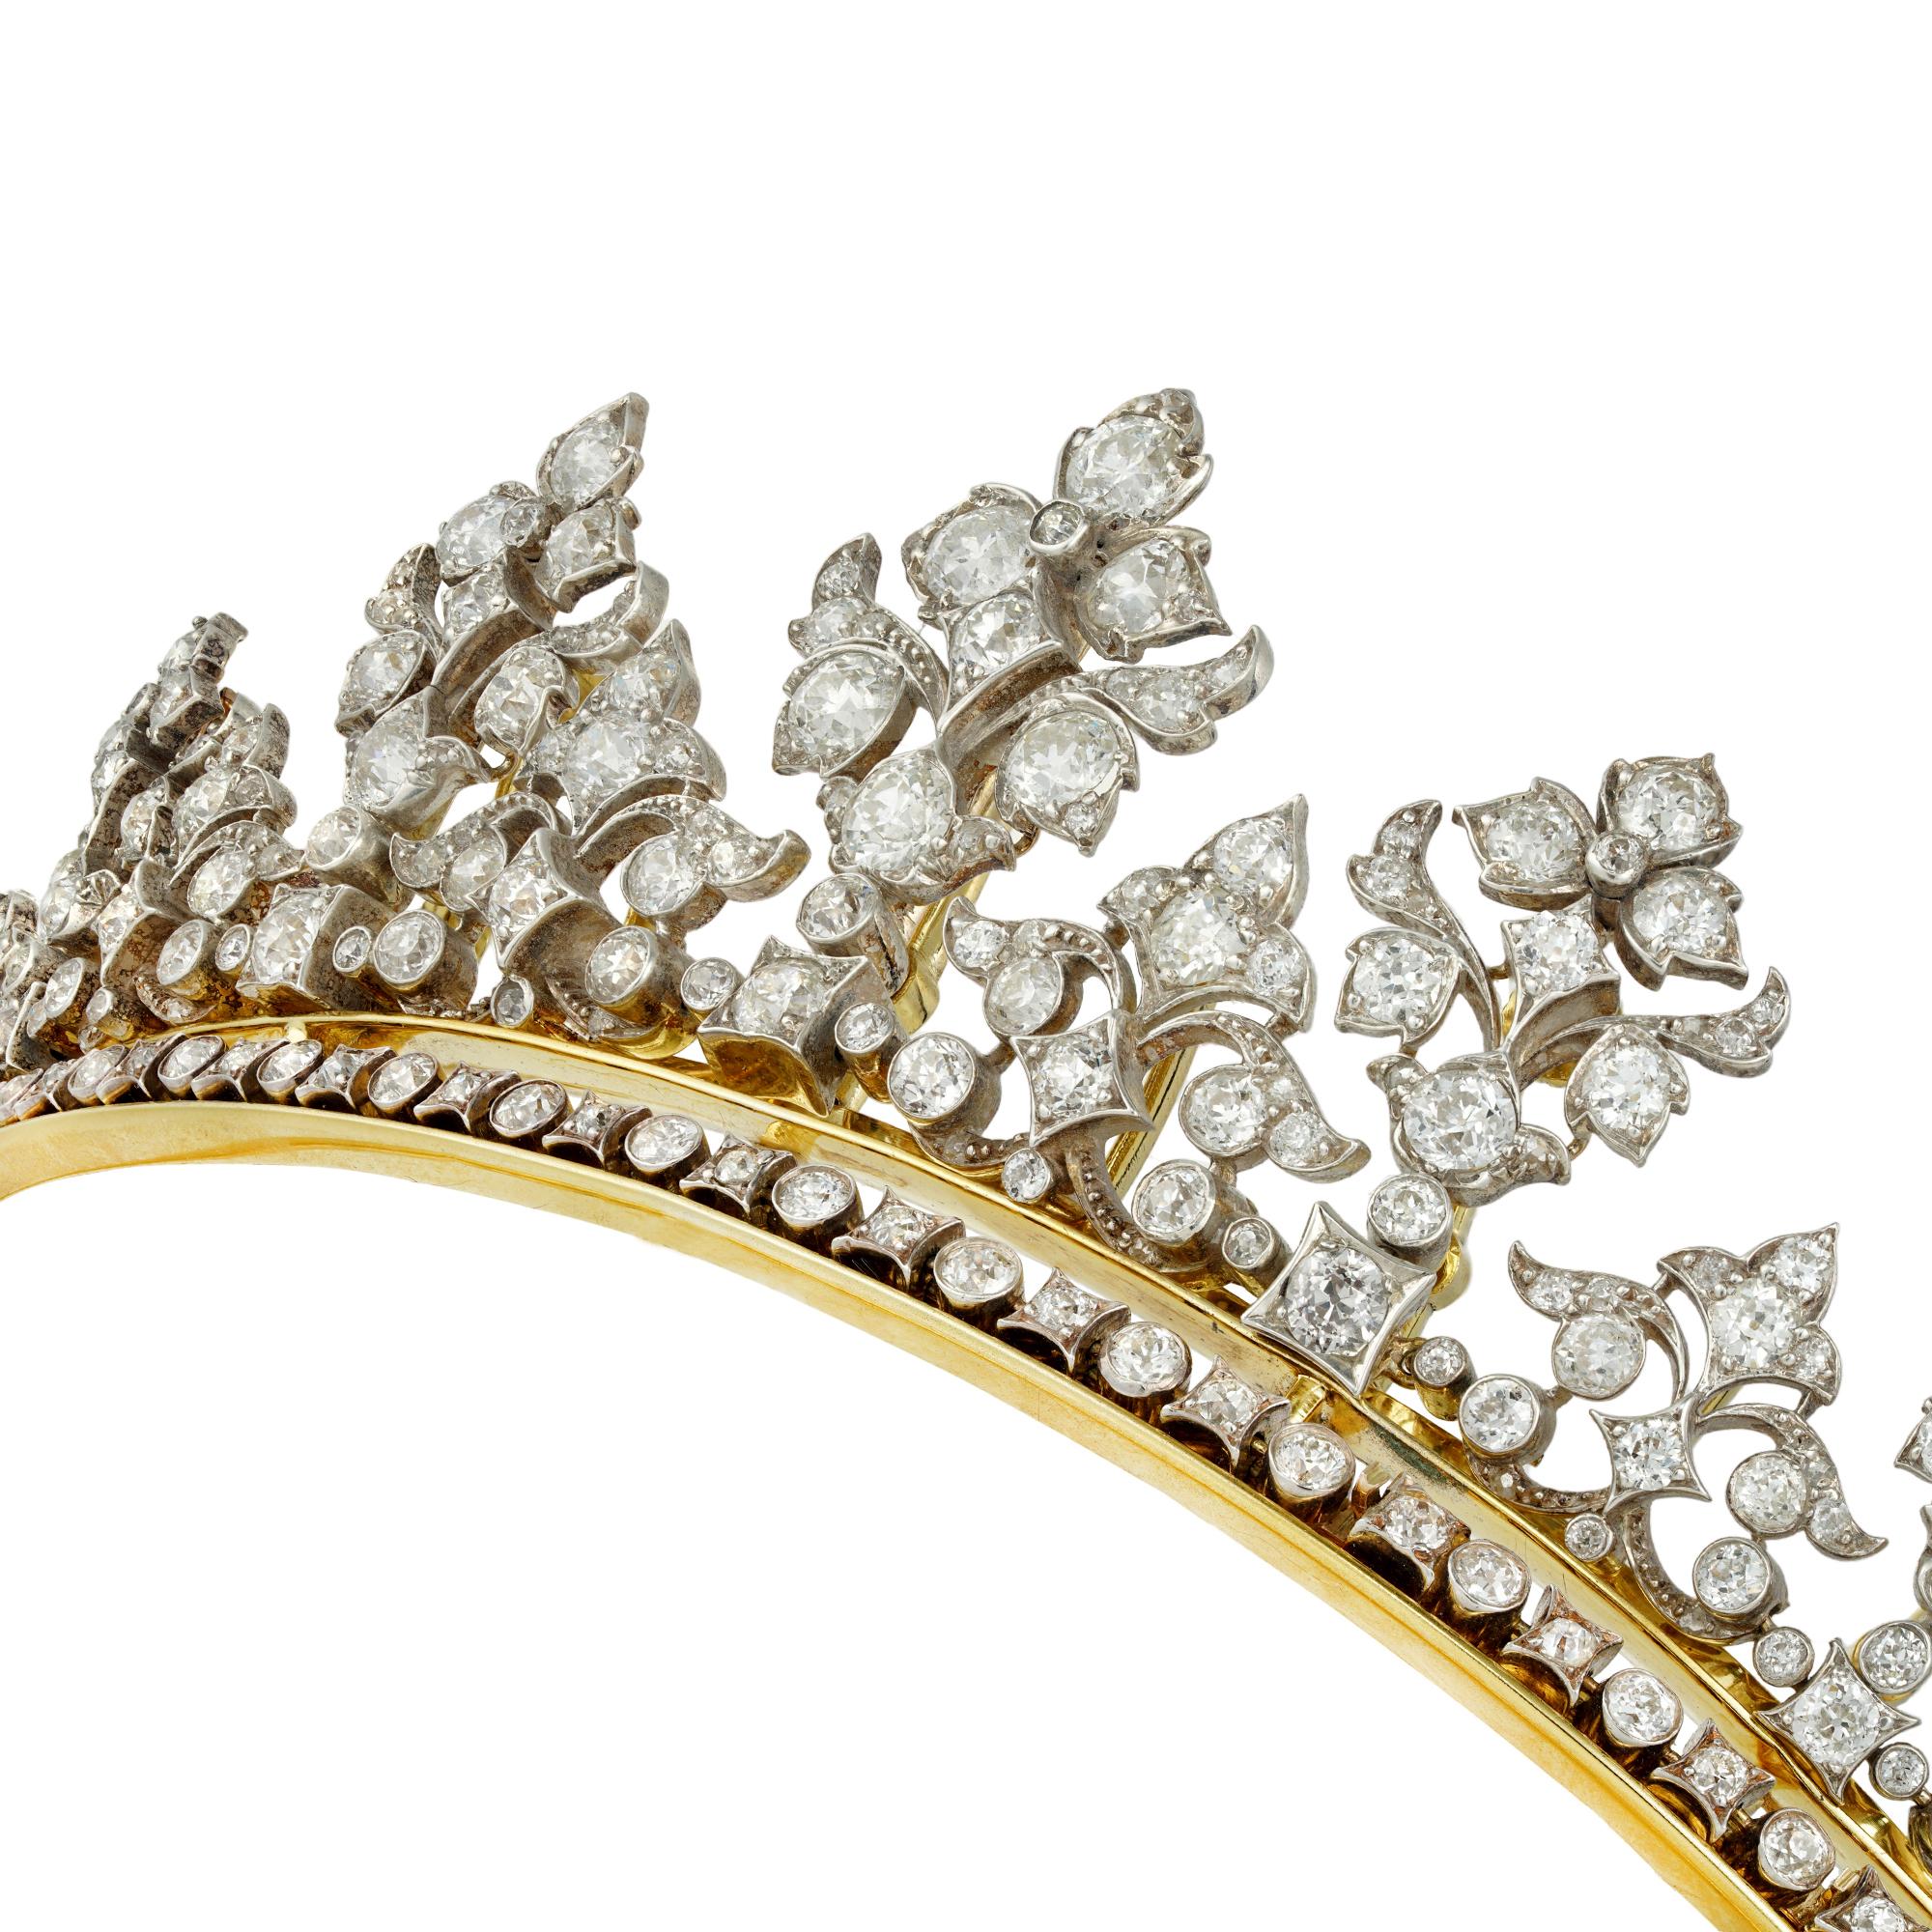 A late Victorian diamond-set tiara, consisting of seven large floral motifs graduating in size from the centre, alternating with eight smaller motifs of foliate design, the base with a diamond-set line with round and square collets, the tiara is set